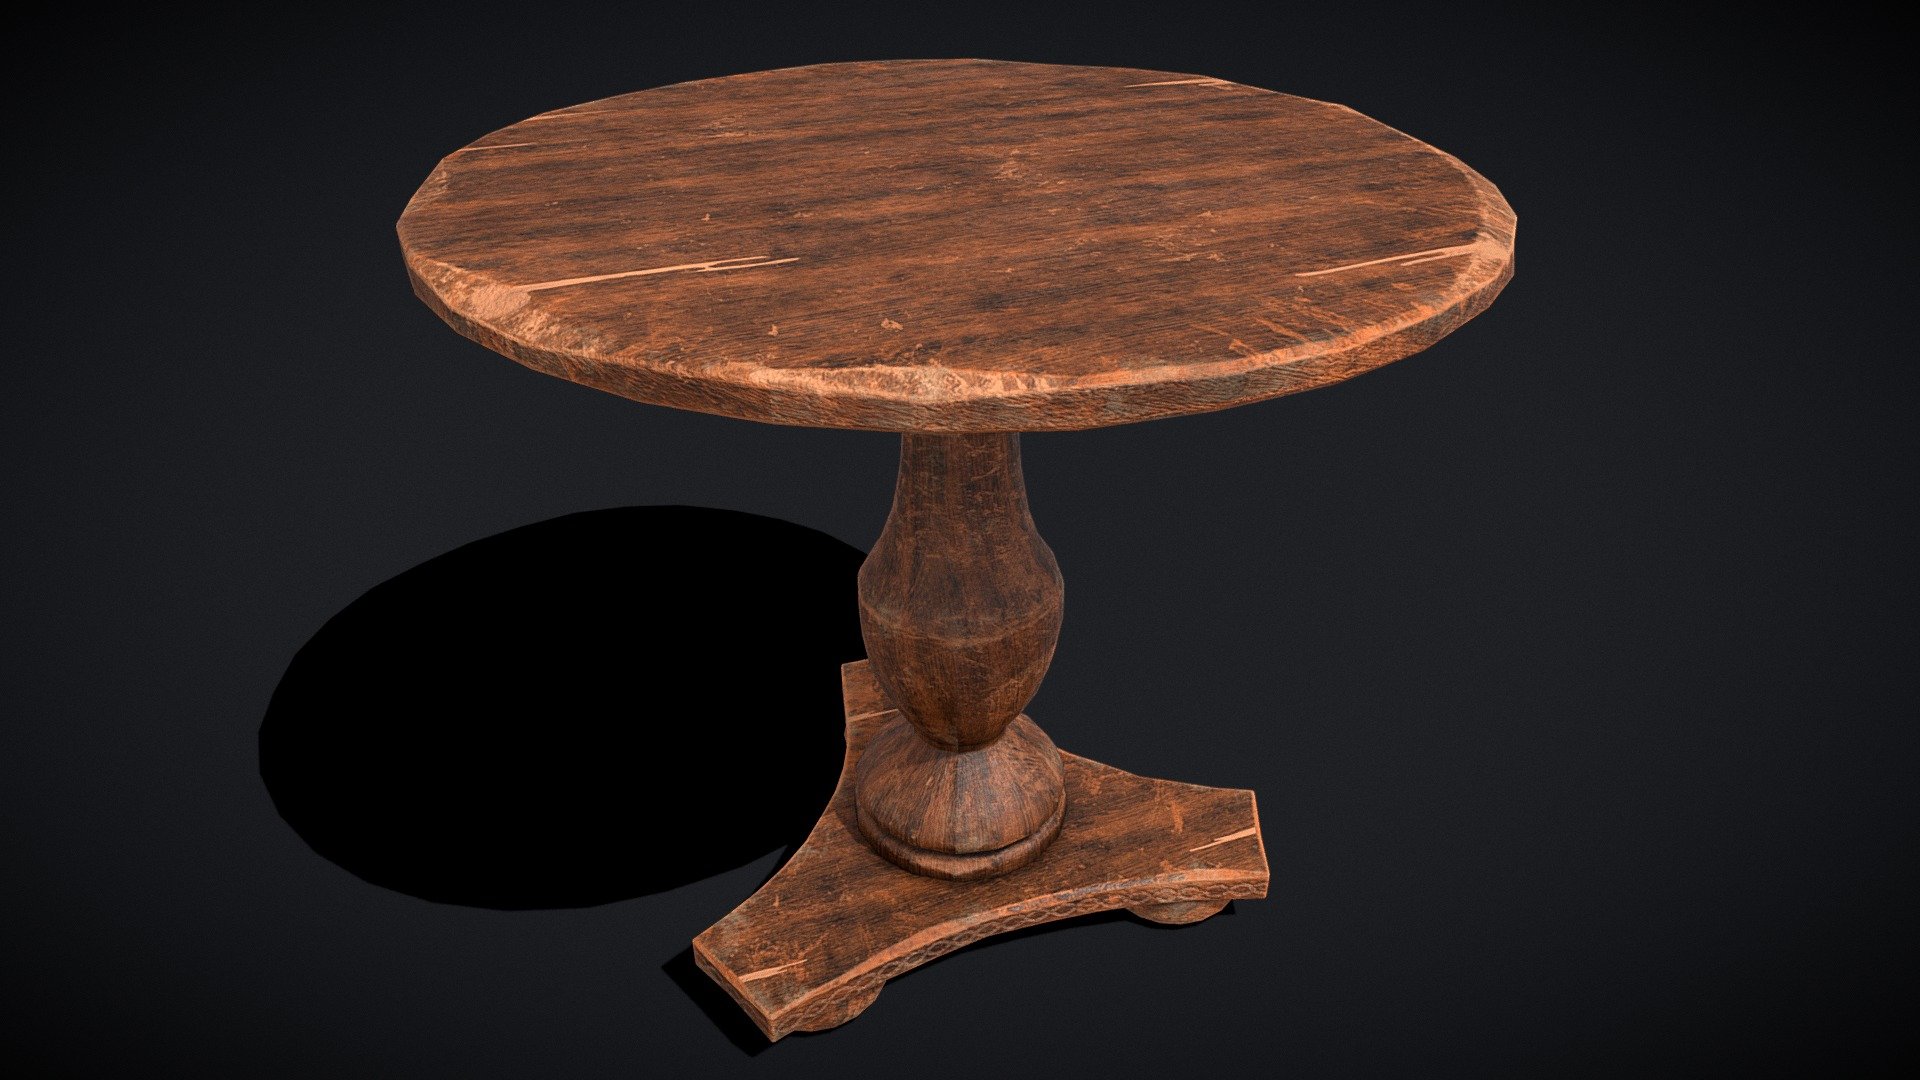 Round Worn Medieval Table 3D Model - Includes PBR Texture in 4096 x 4096 3d model